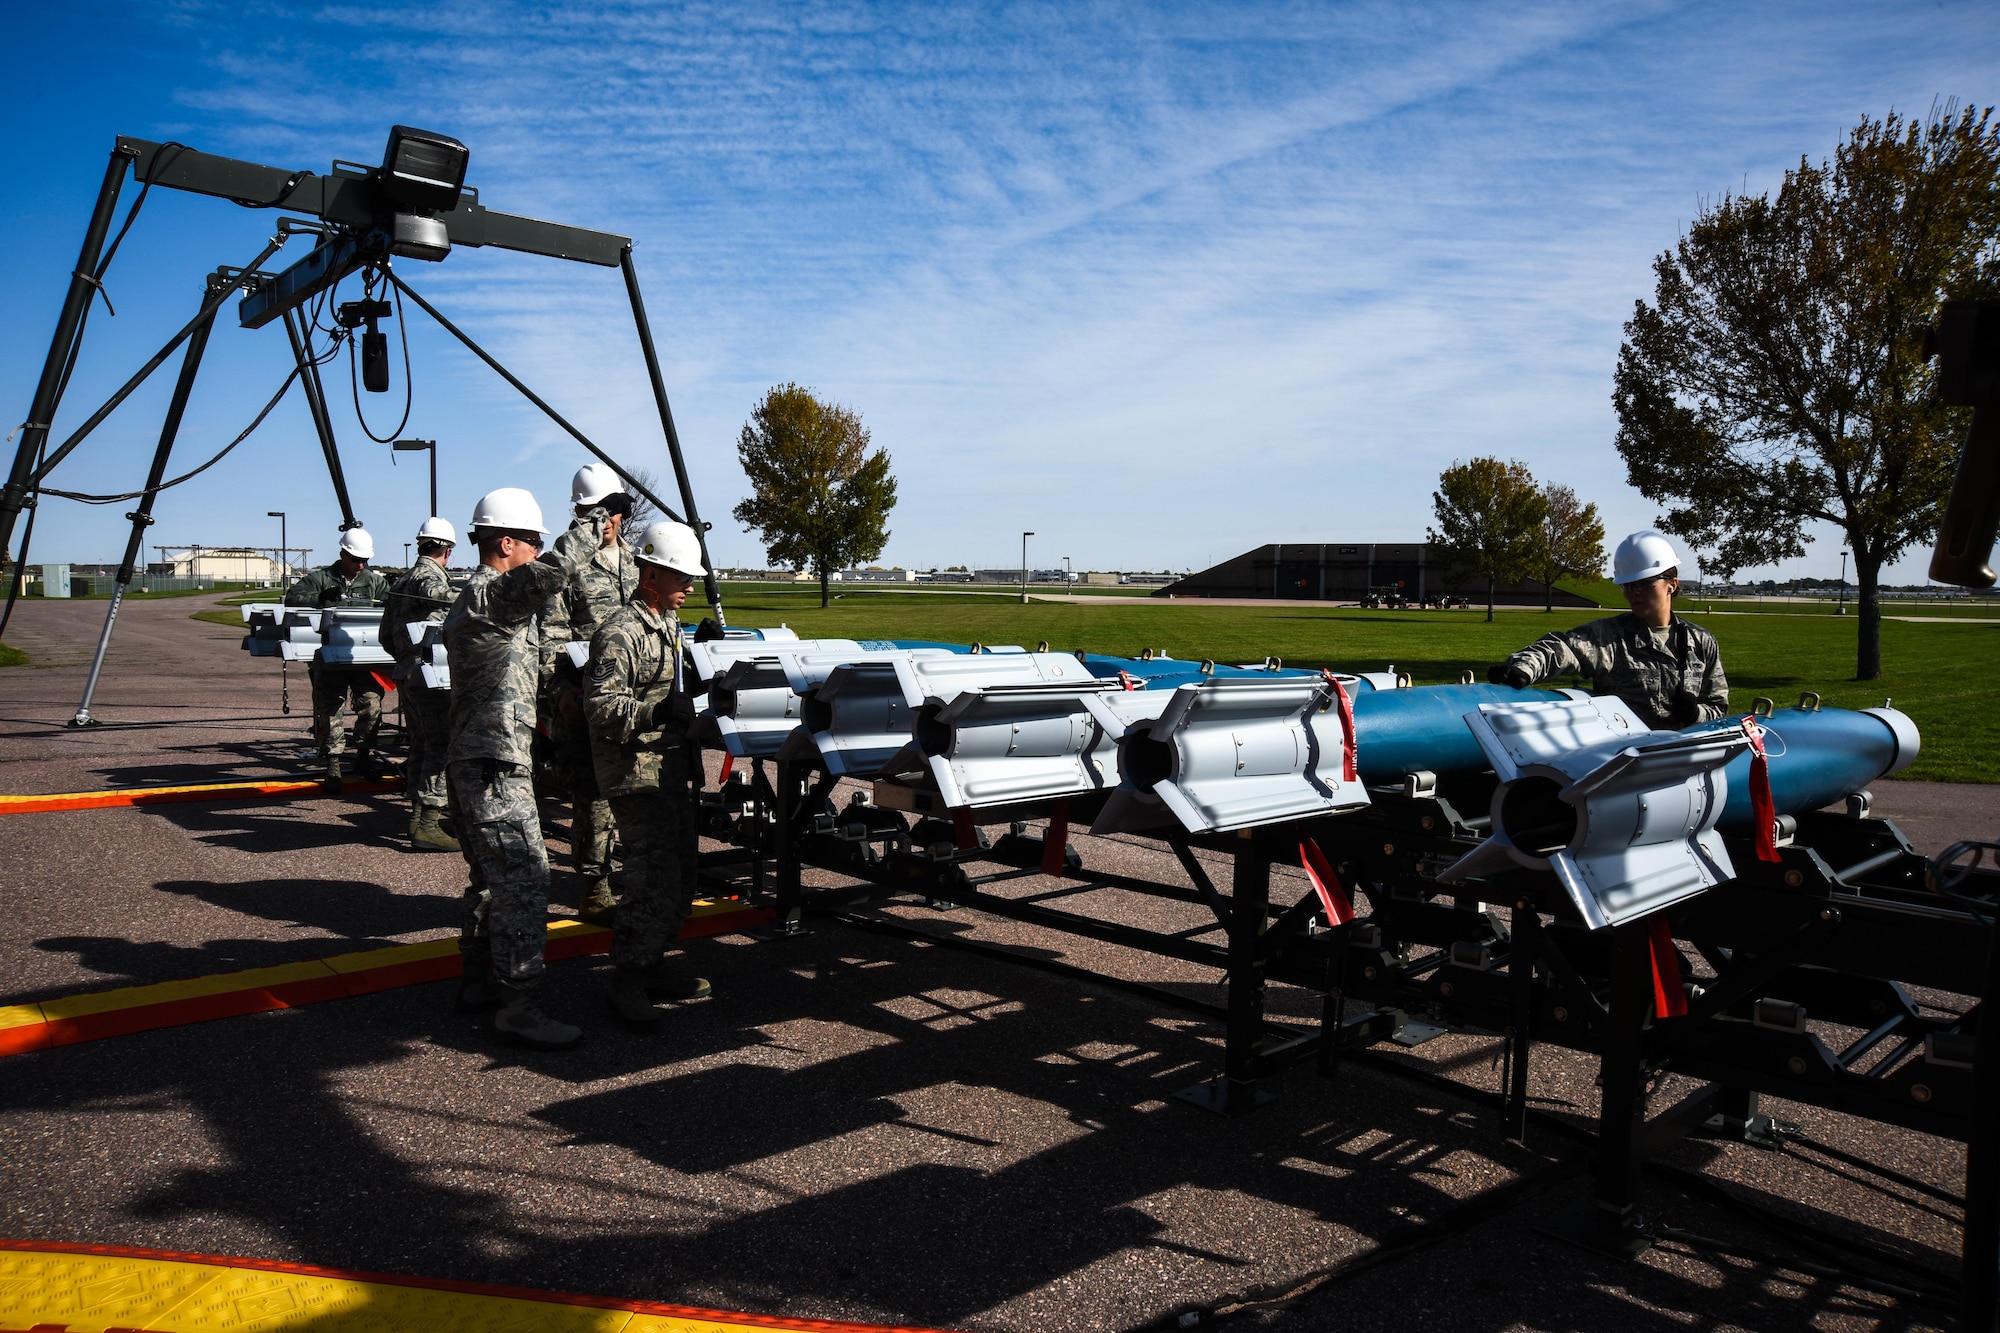 114th Maintenance Squadron ammunition Airmen prepared munitions during the Phase 1 of the Attack Response Exercise (ARE) Oct. 13, 2017, Joe Foss Field, S.D.